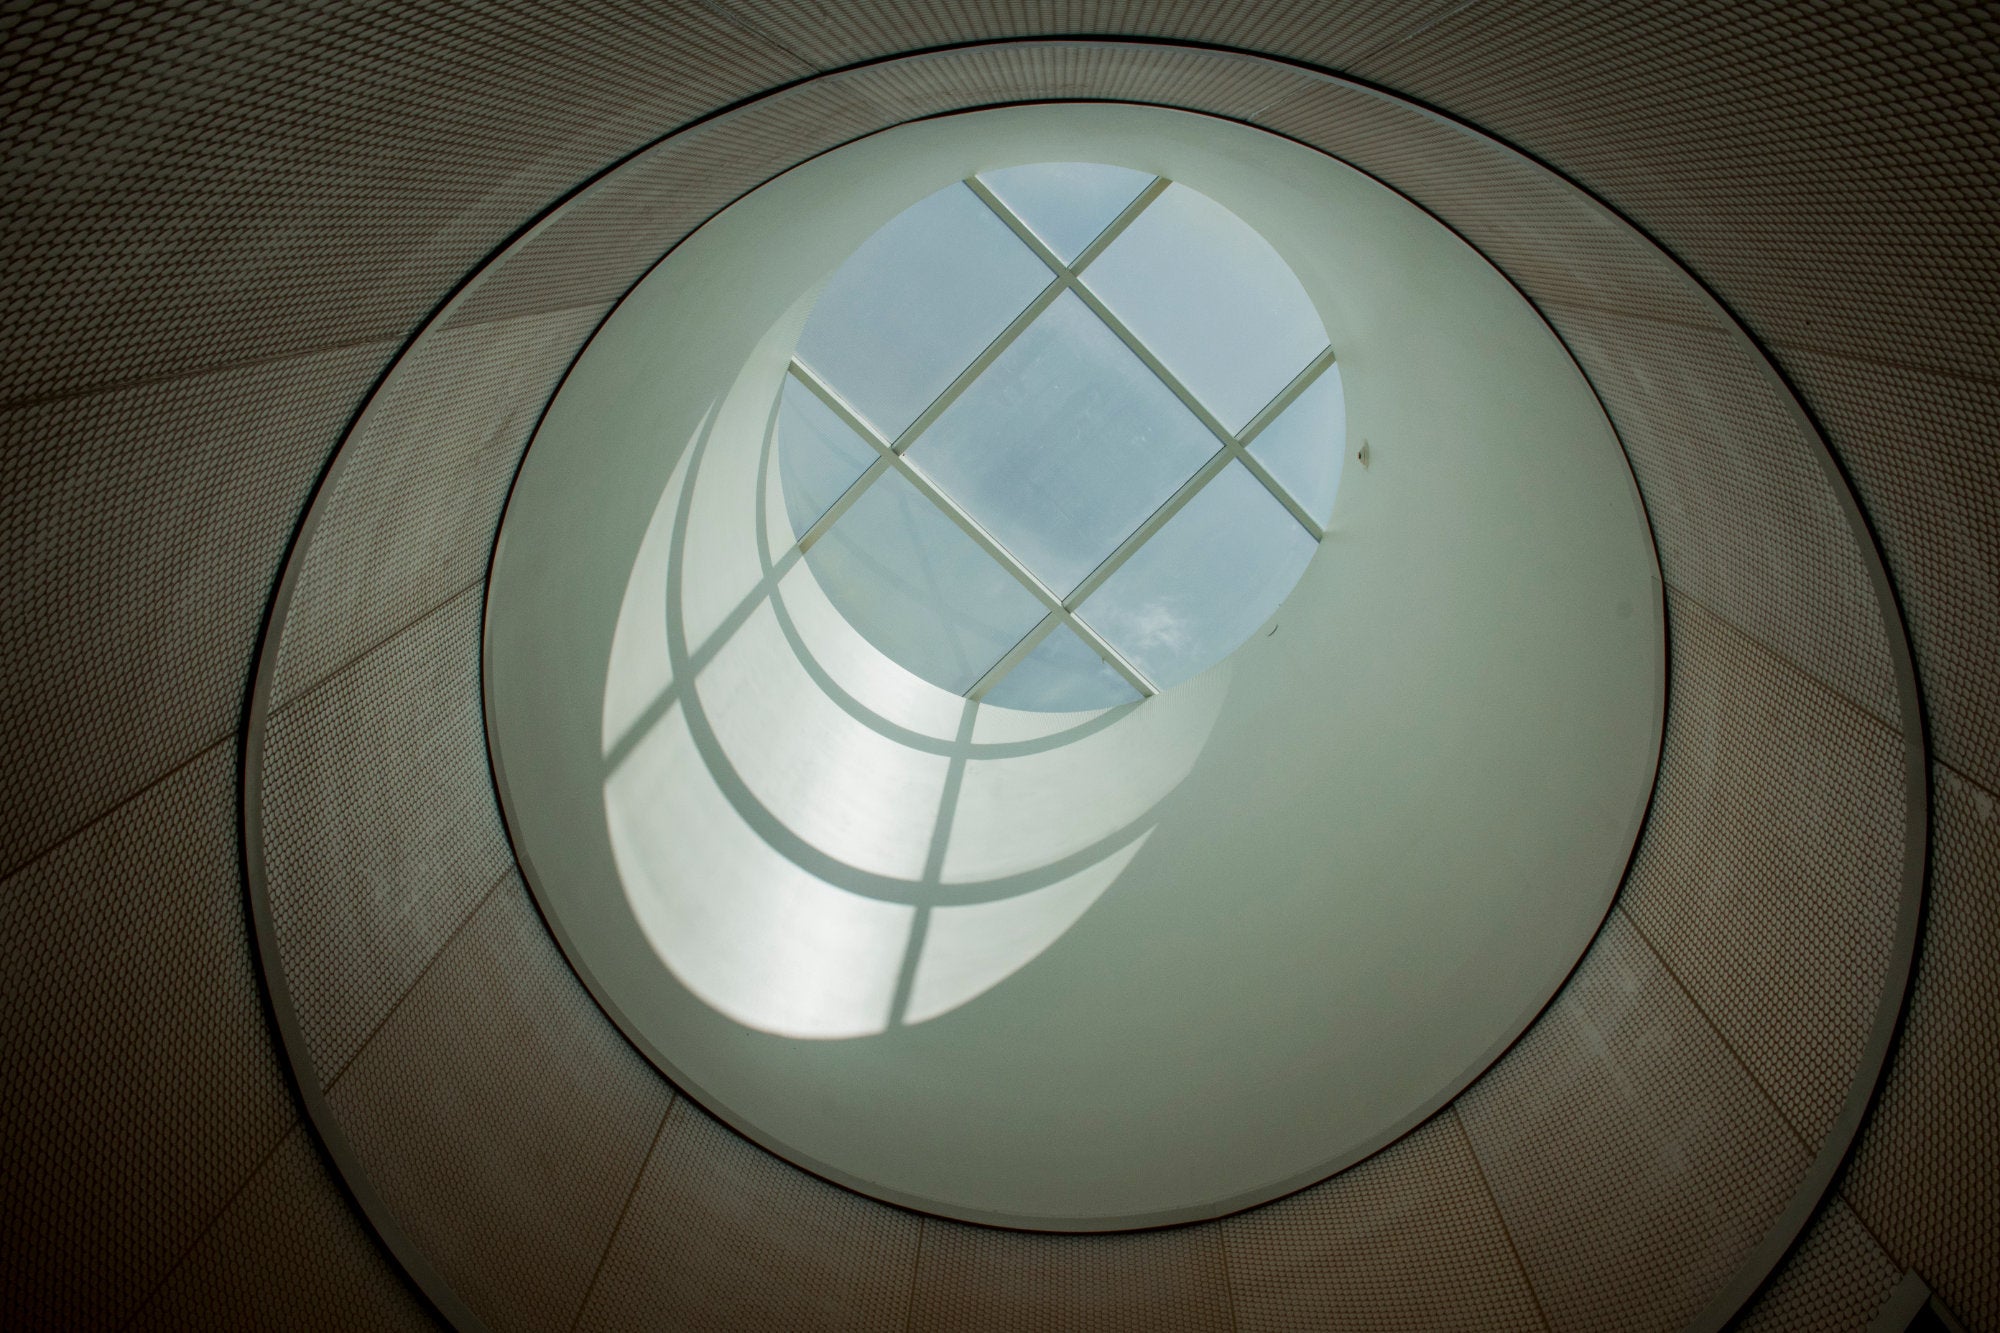 A distinctive oculus adds natural light to enter the building.